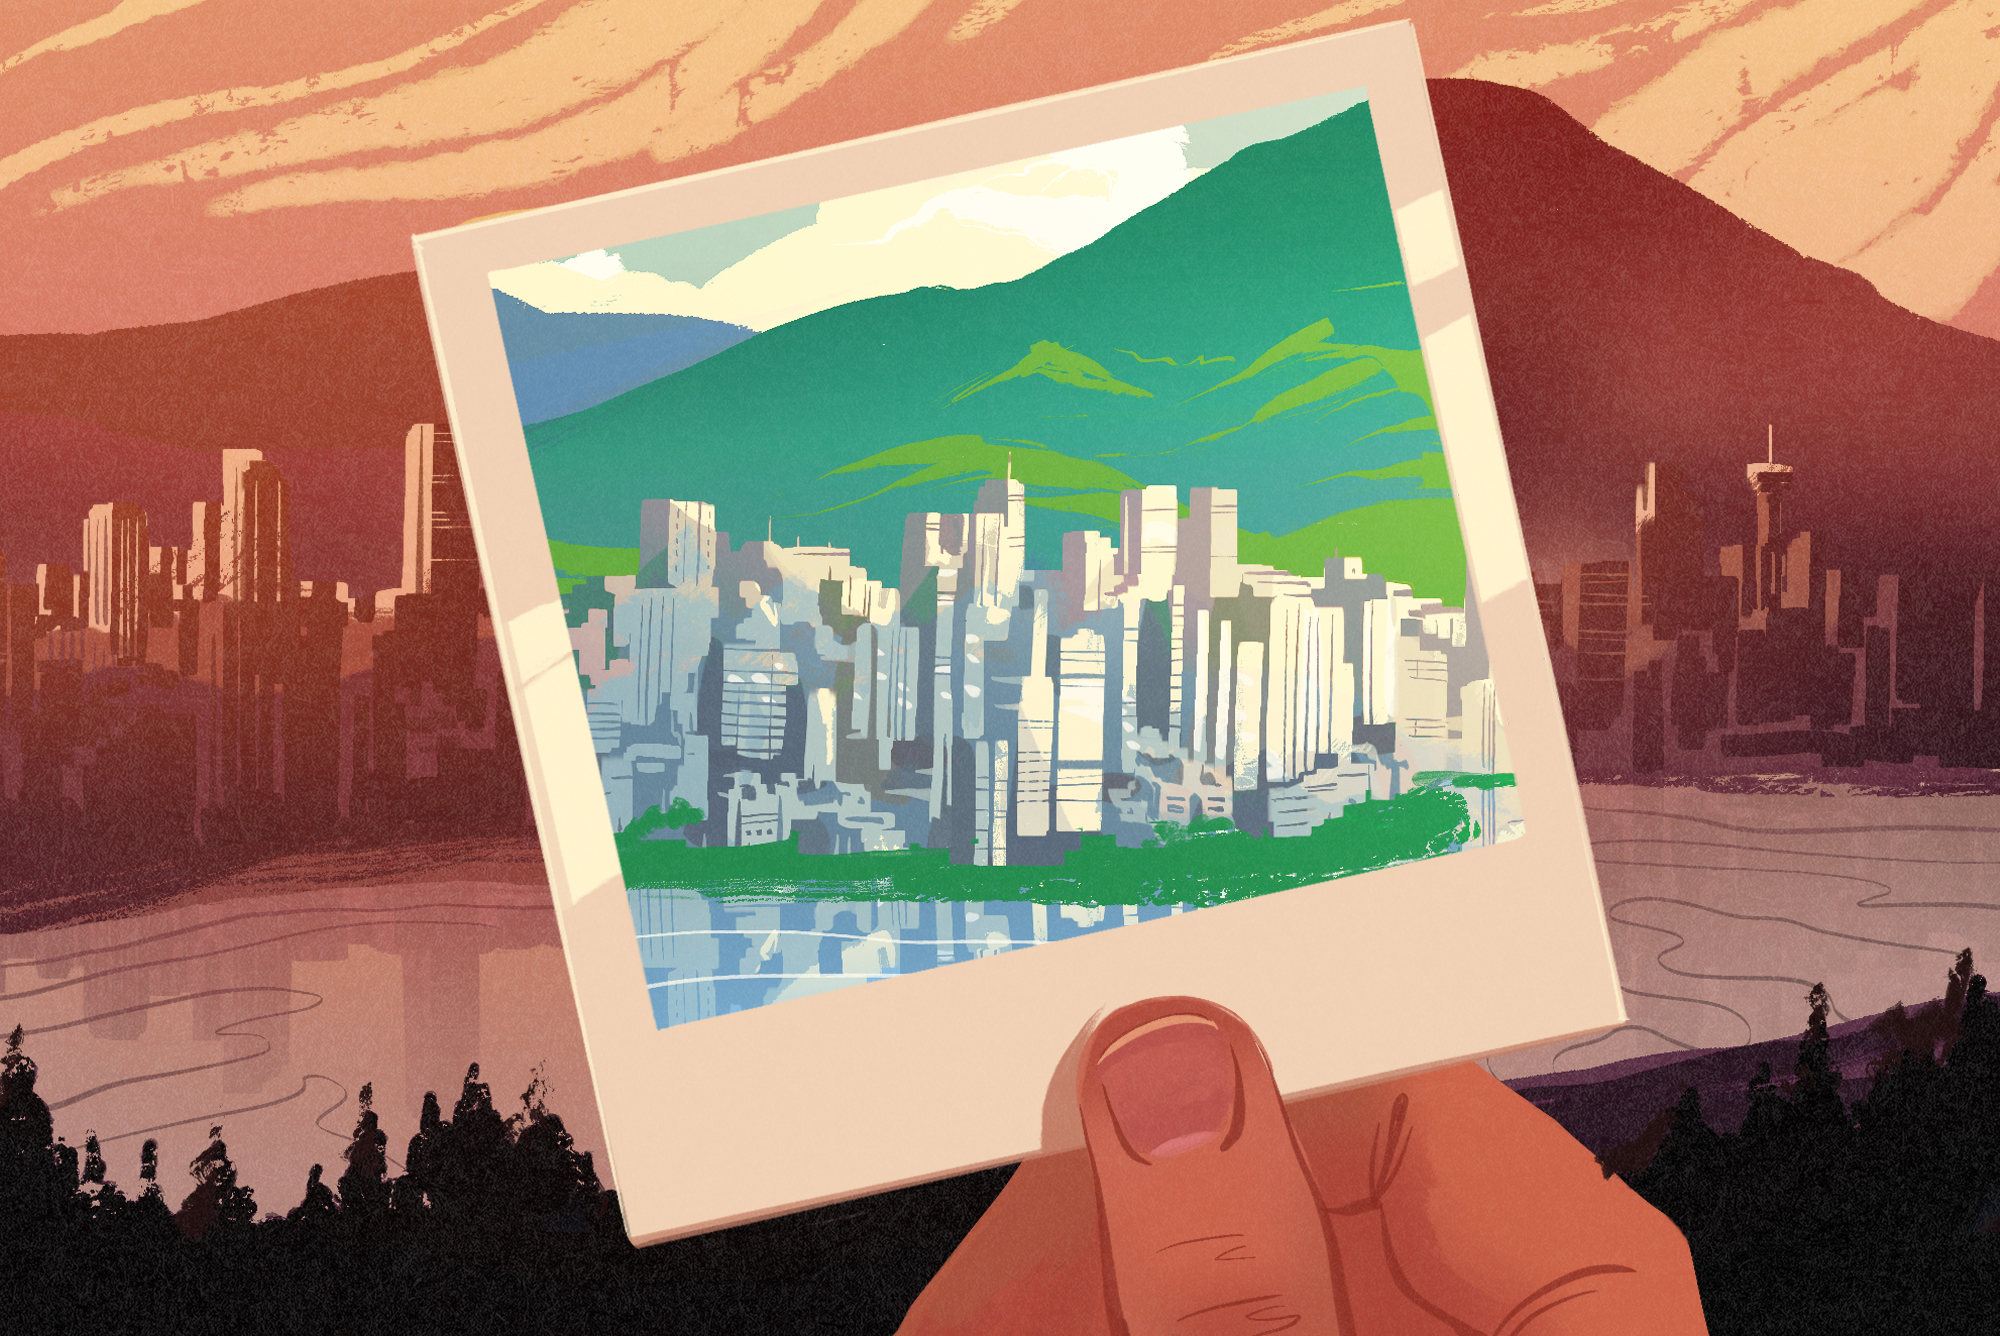 A hand holds a polaroid picture of Vancouver, which looks bright with green hills and mountains. Behind the polaroid, the rest of the Vancouver landscape is visible. It is darker, with the city and mountains lit in orange and red.